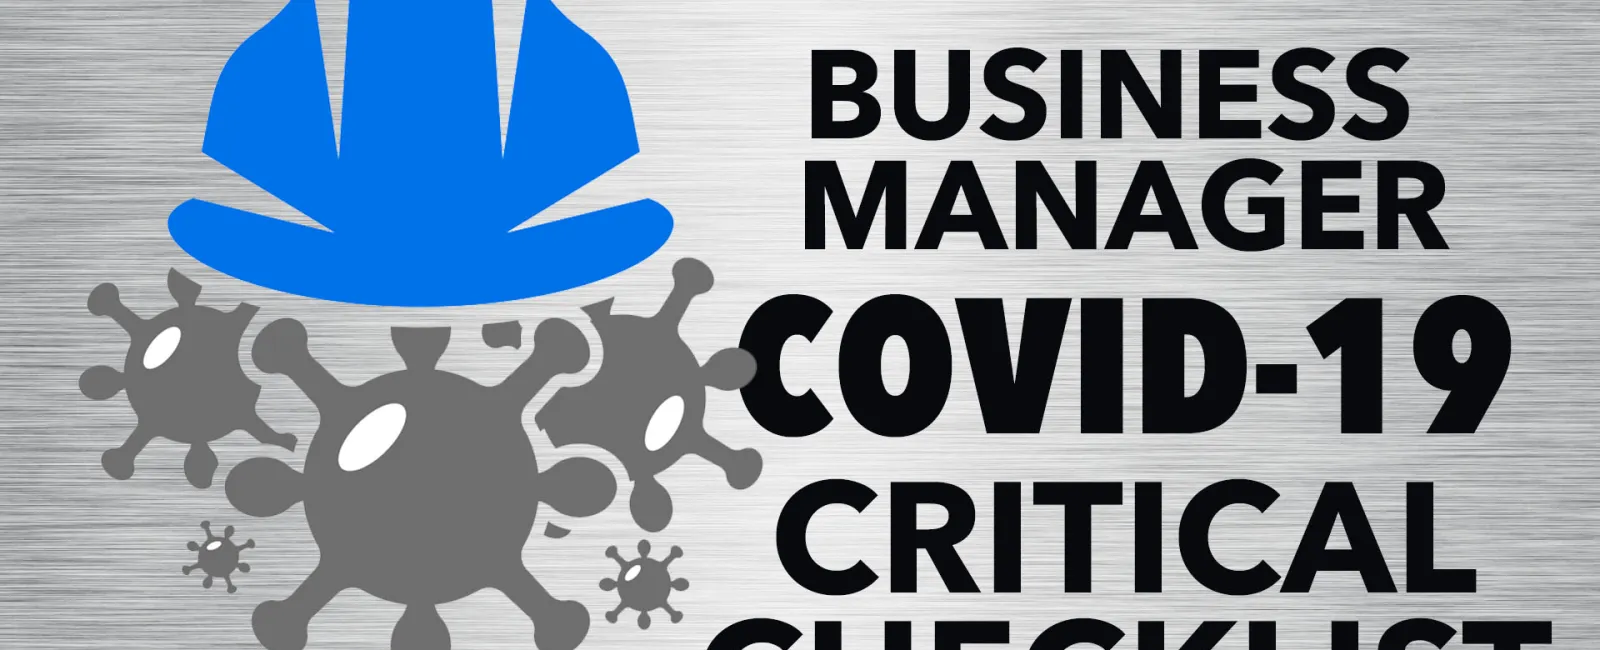 Business Manager COVID-19 Critical Checklist